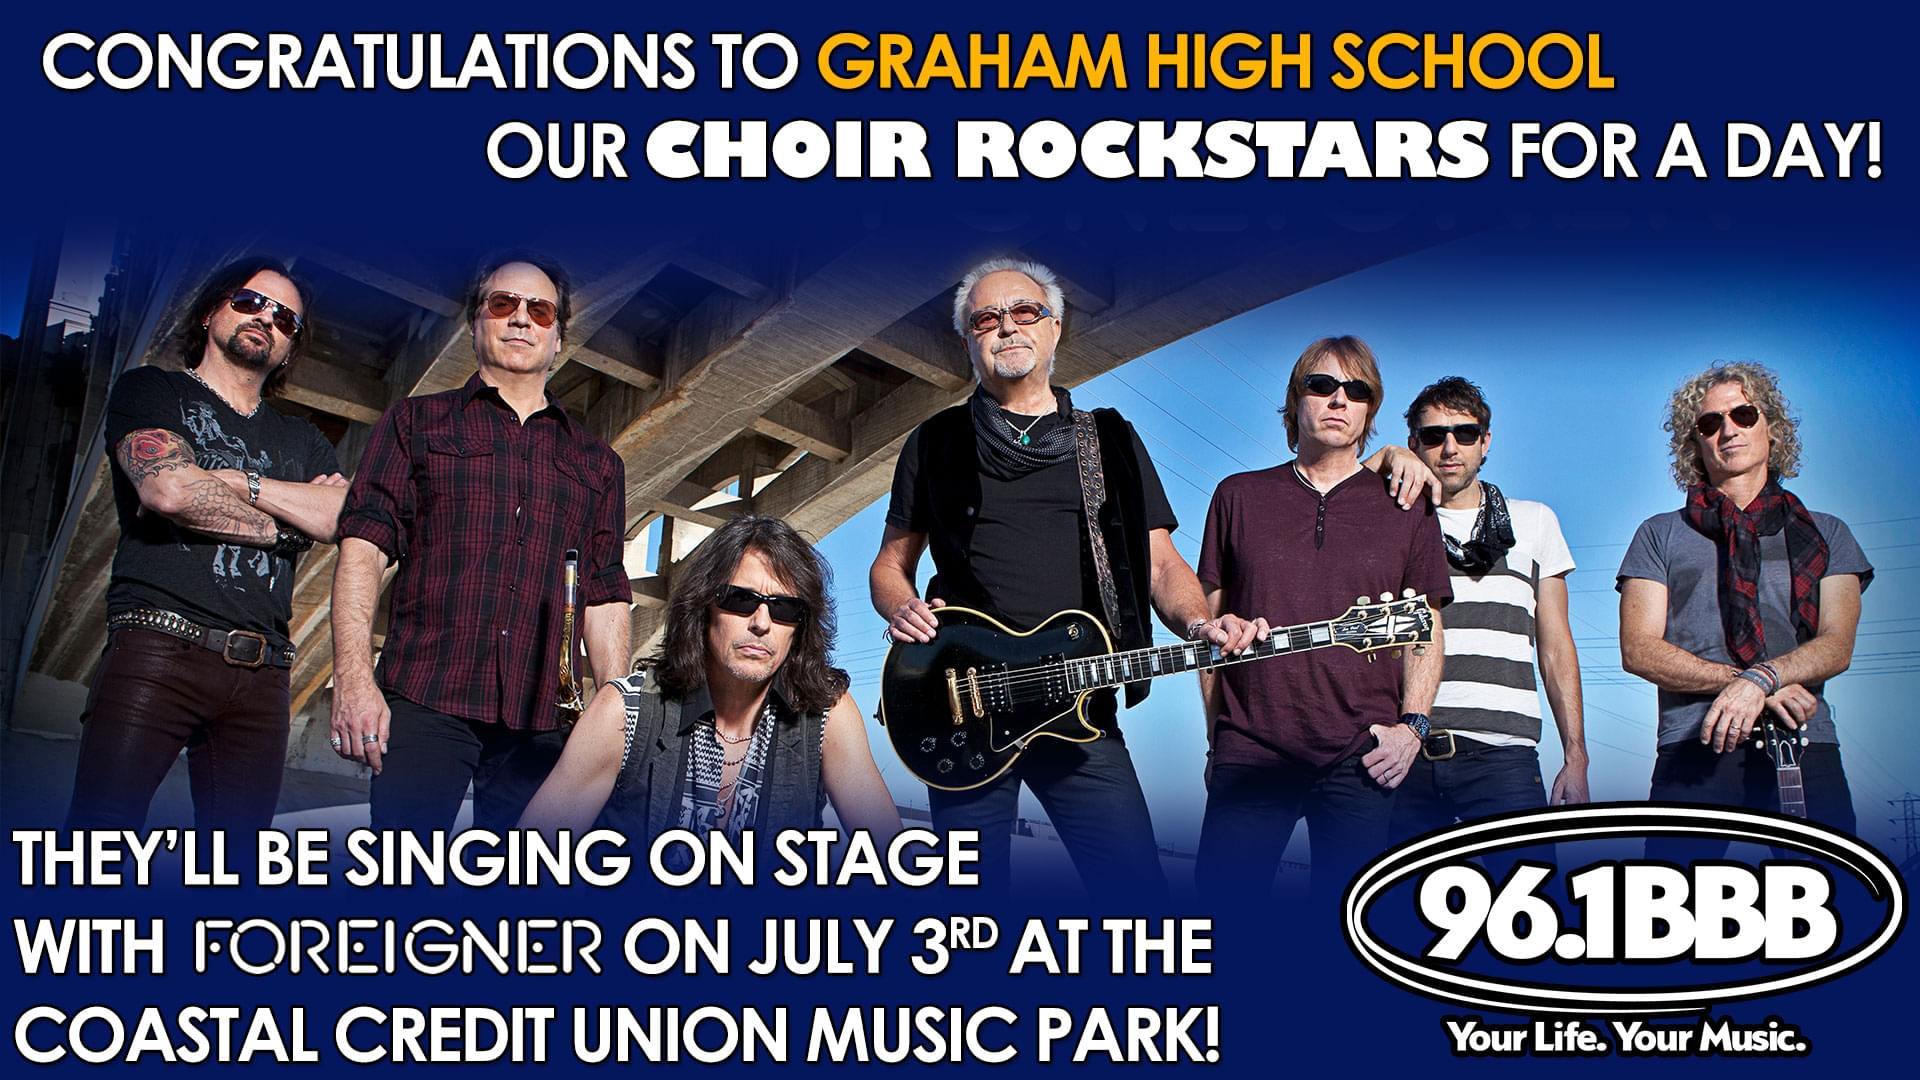 Congrats to Graham High School our Choir Rockstars for a Day!